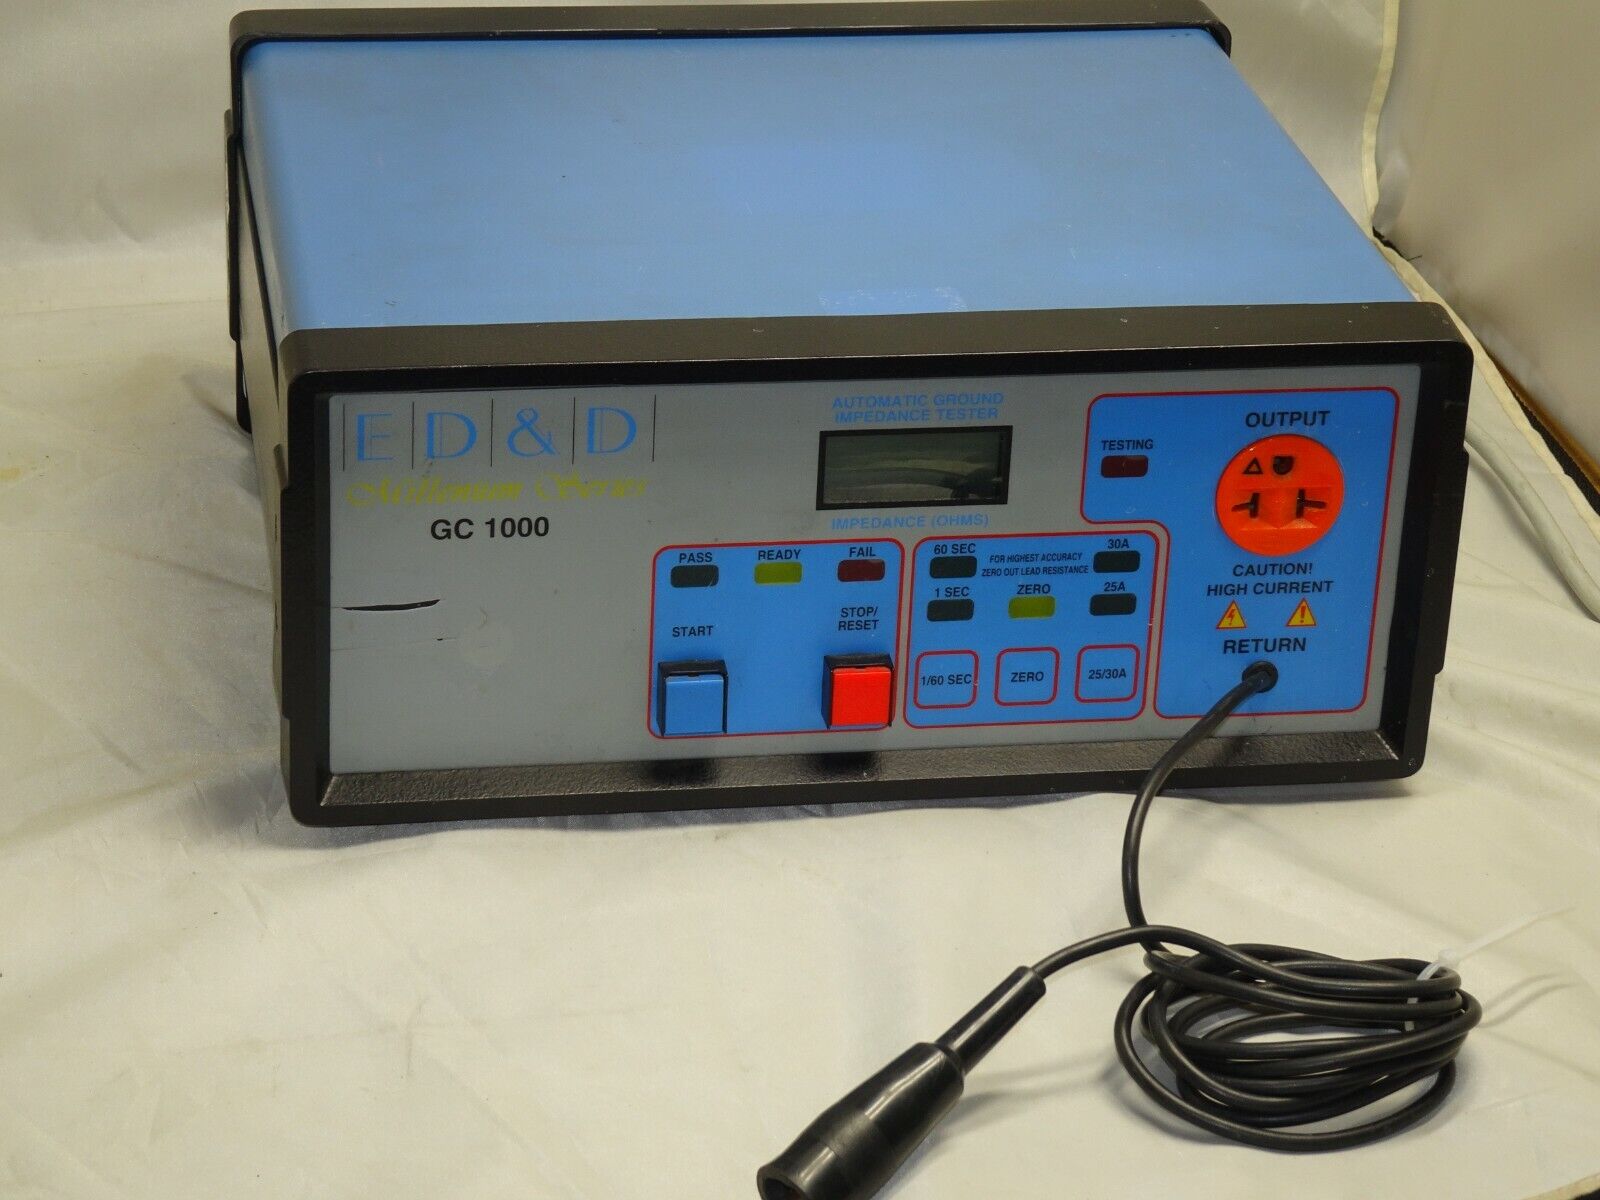 ED&D GC-1000/GC1000 Automated Digital Ground Impedance Continuity Tester 25/30 A